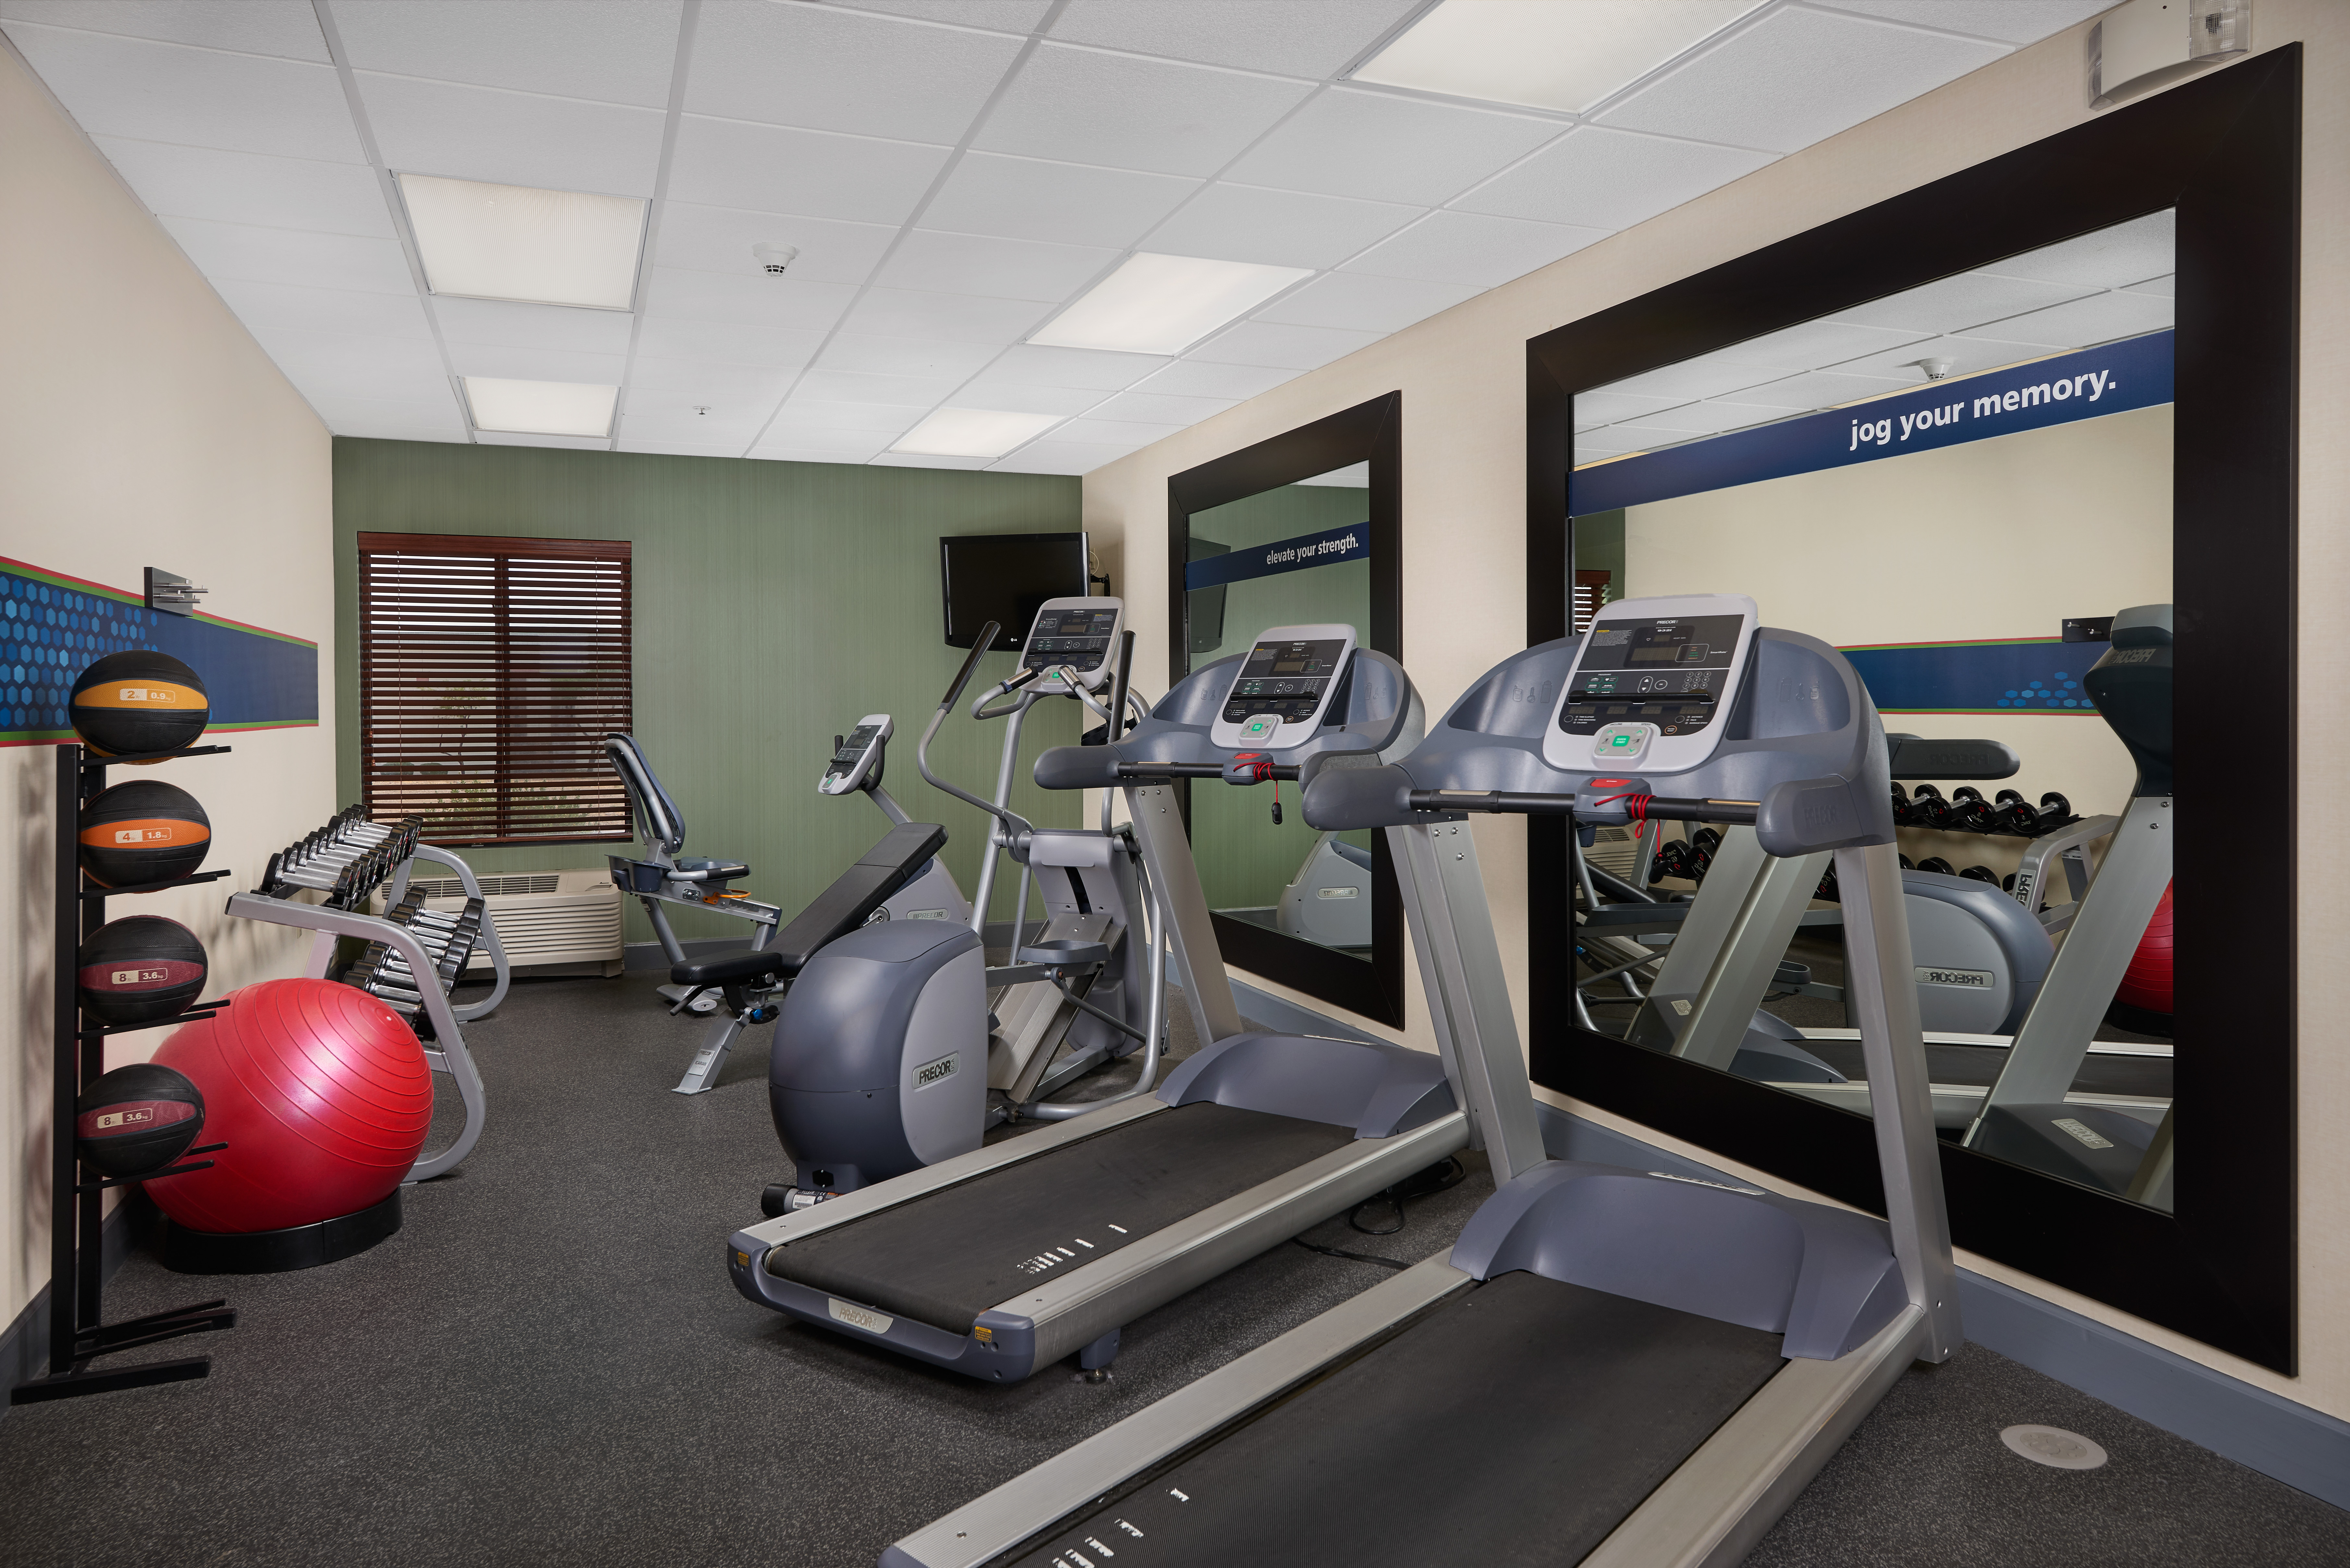 Fitness Center with Treadmills, Cross-Trainer, Cycle Machine, Dumbbell Rack, Gym Ball and Medicine Ball Rack